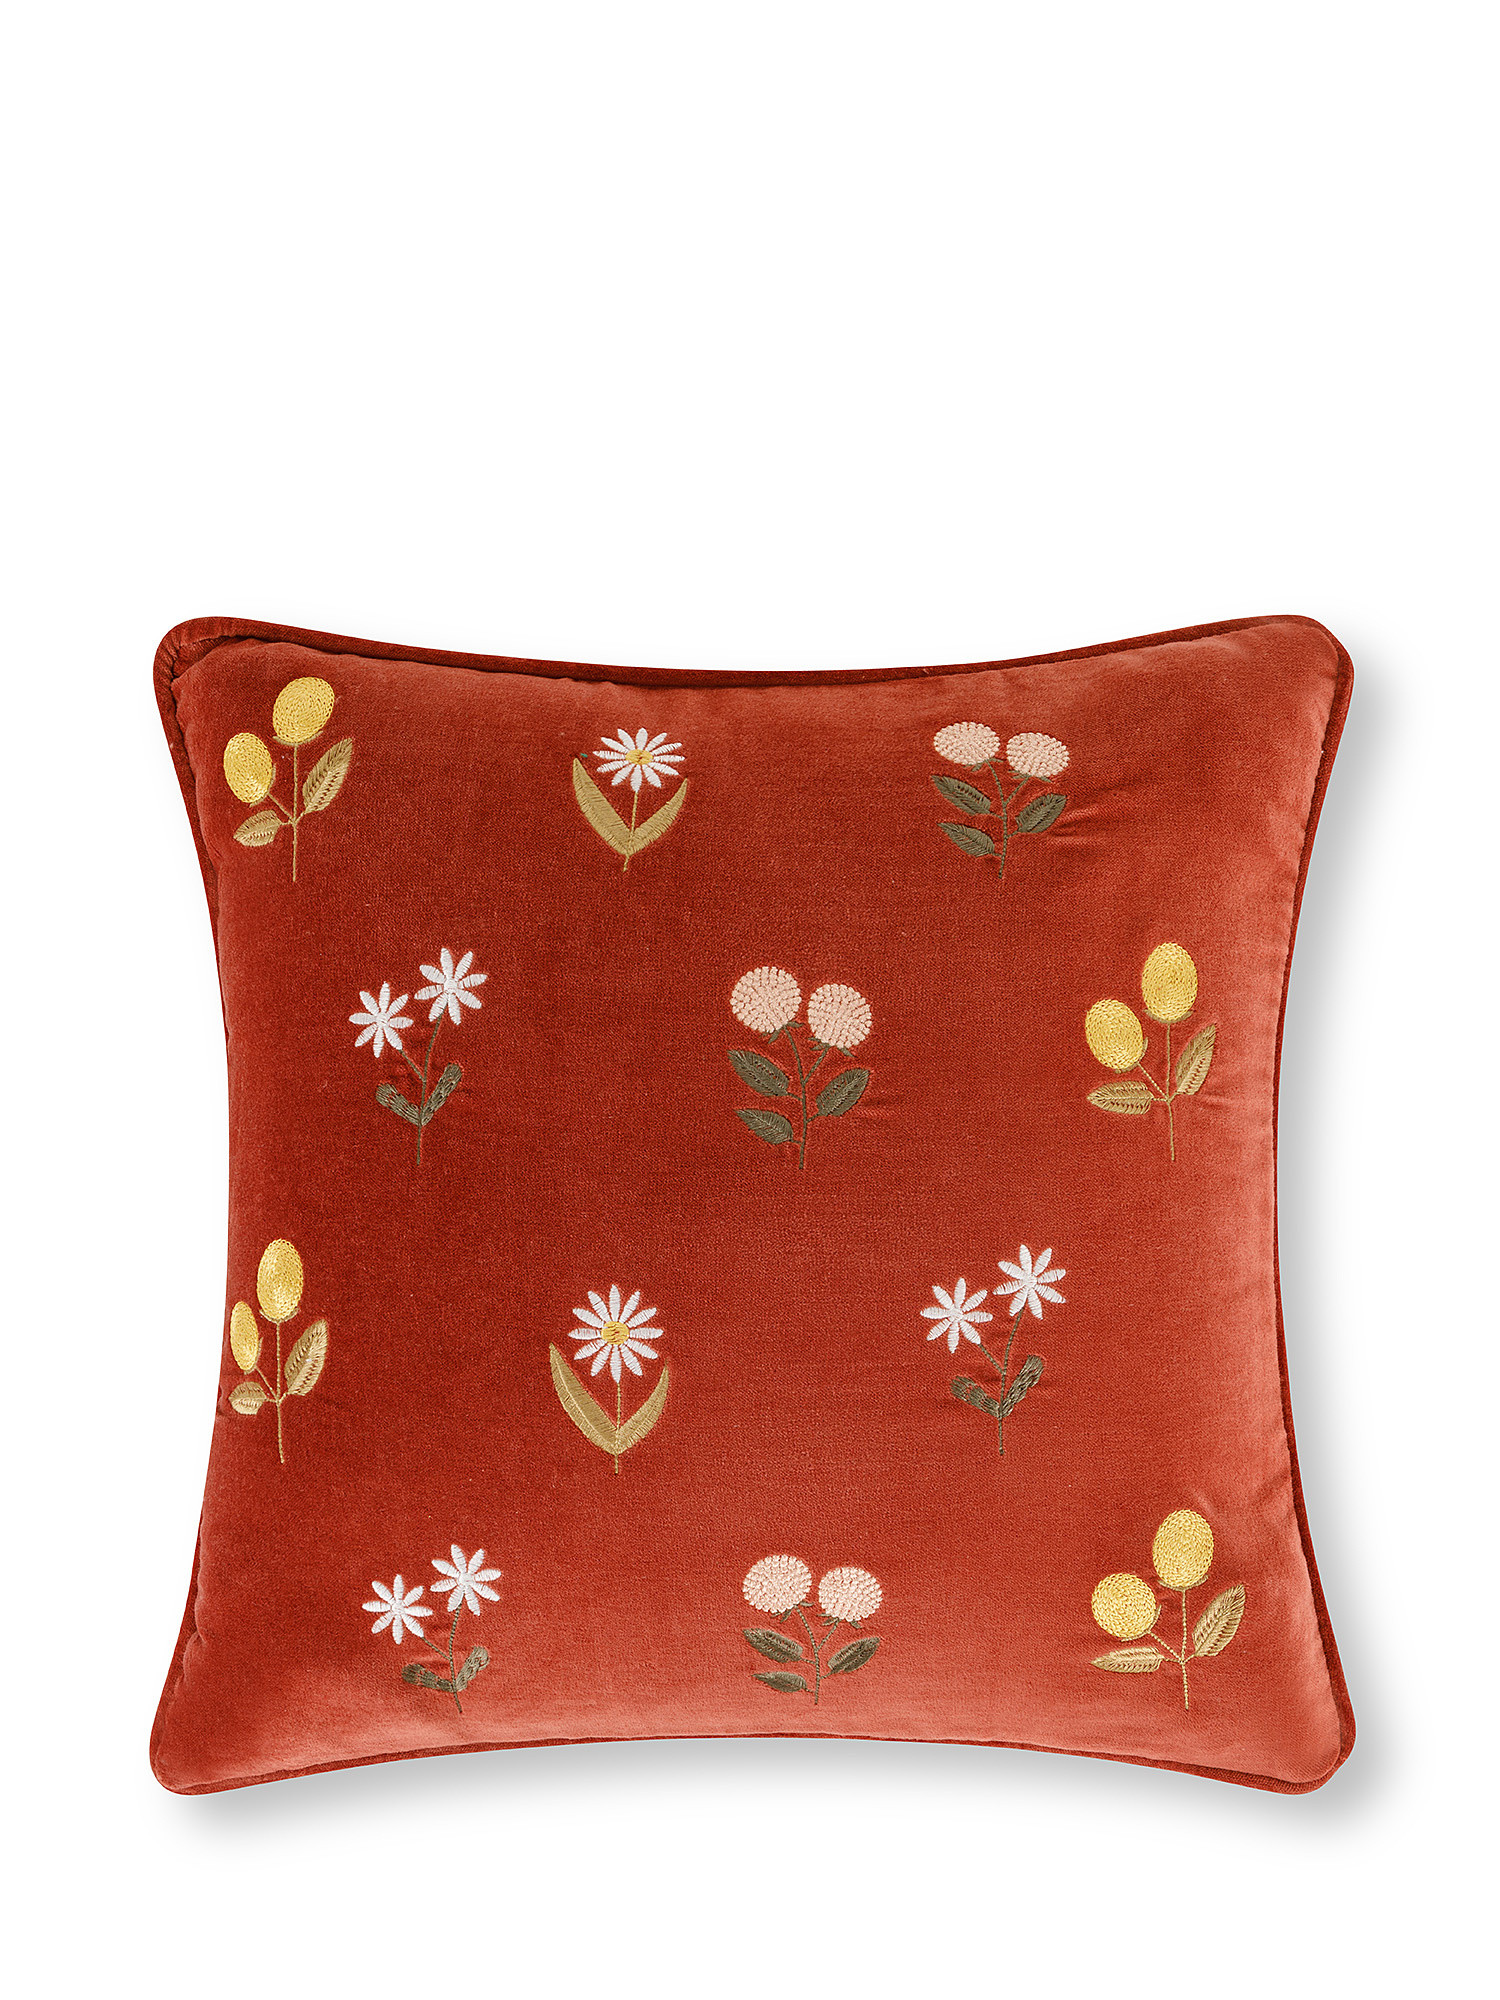 Velvet cushion with flower embroidery 45x45cm, Brown, large image number 0